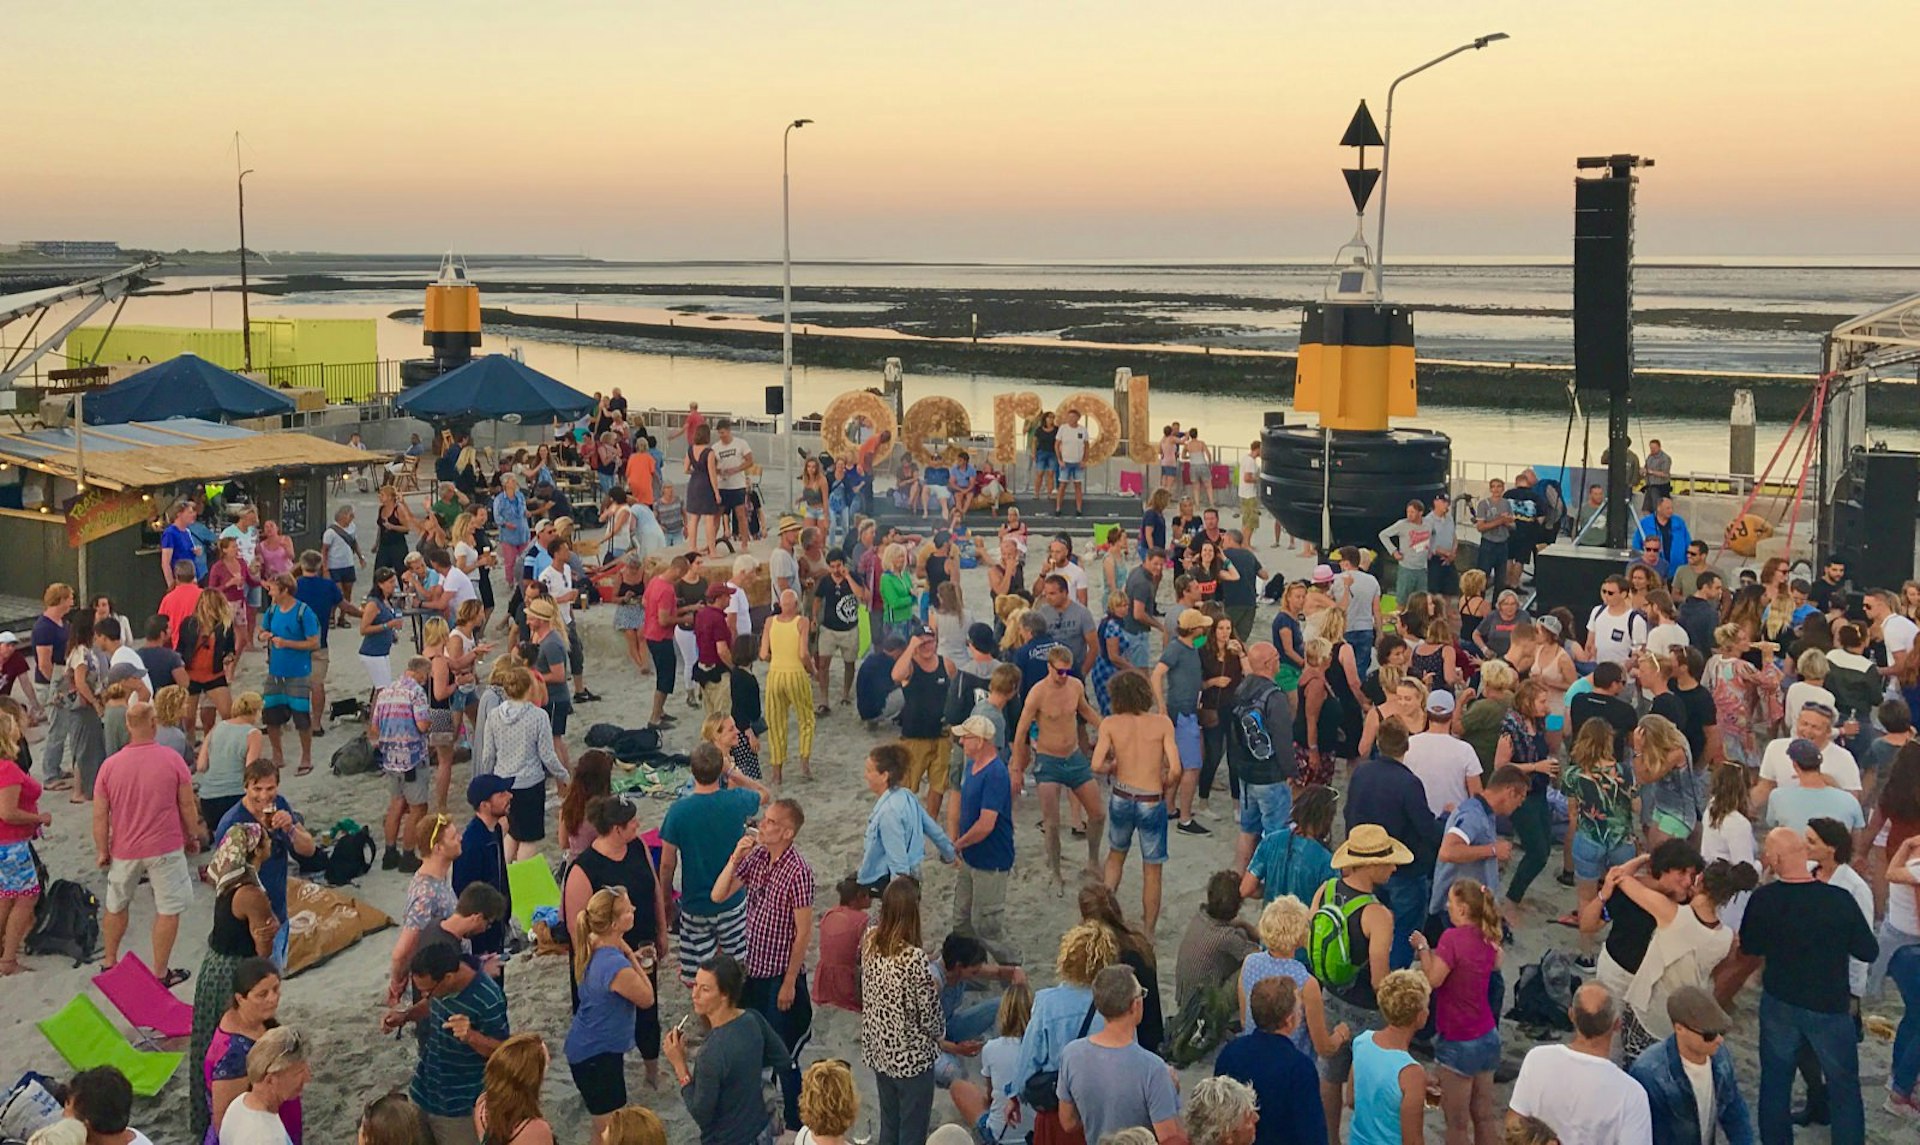 Revellers dance at sunset at the Oerol Festival on the island of Terschelling in The Netherlands